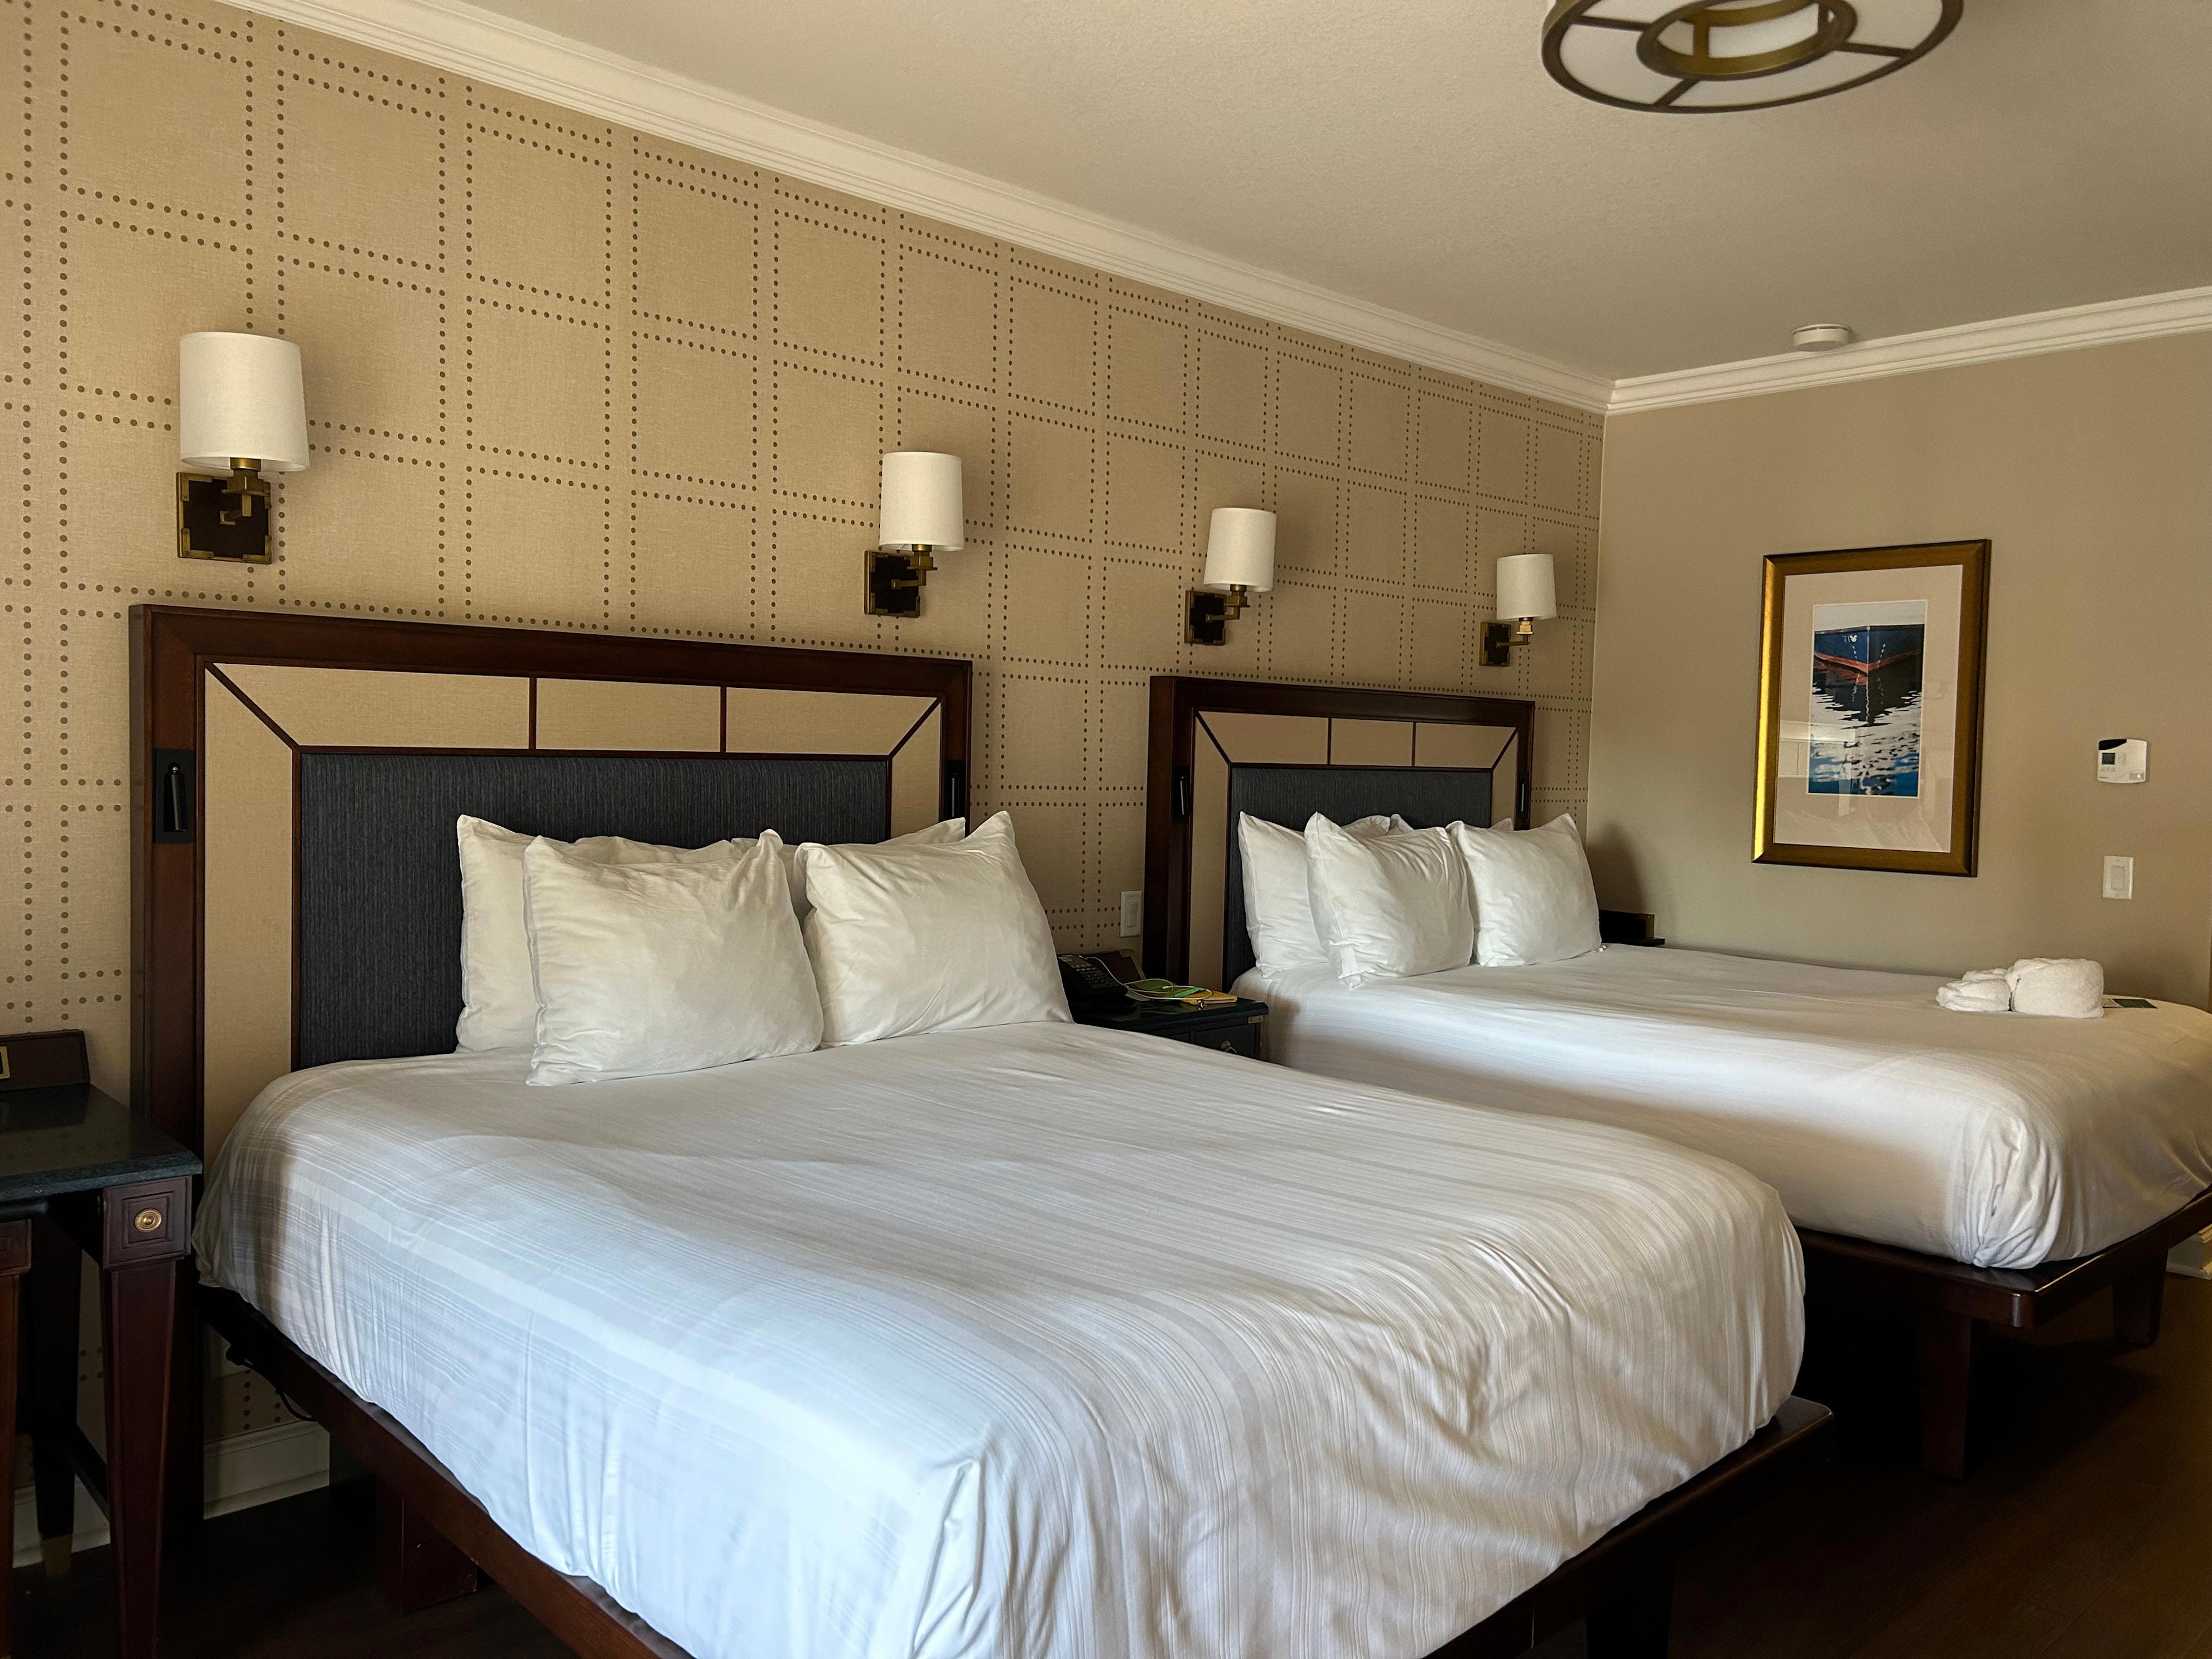 <p>Rooms at the Yacht Club start at $484 per night for a standard view and can go well into the thousands for suites and club-level accommodations, depending on the time of the year. </p><p>My room had two queen-sized beds, a balcony, and a view of the front gate of the resort. The room was equipped with a pull-out couch, mini fridge, a safe, Keurig coffee machine, and ample storage space for clothes and luggage underneath the beds.</p>